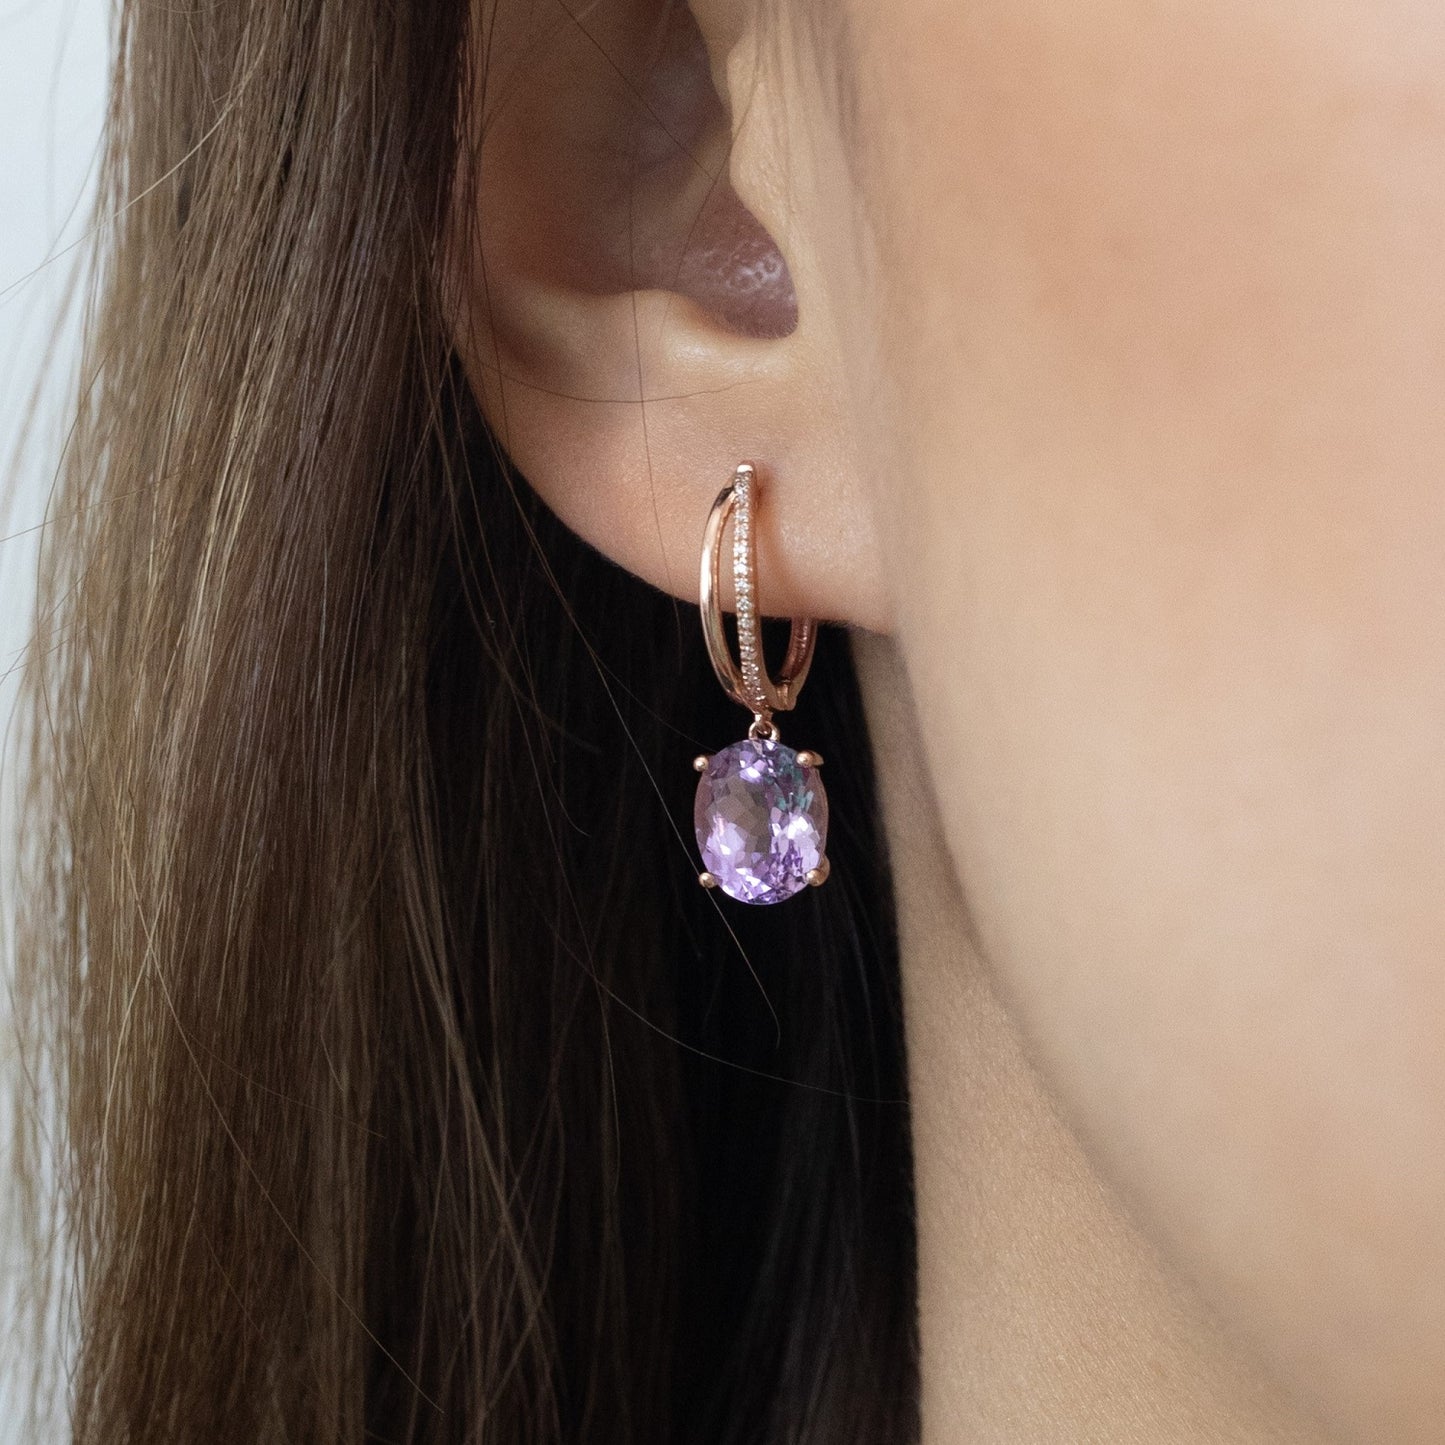 the Stone Sparkle Earrings - Rose Gold Plated Sterling Silver with Pink Amethyst